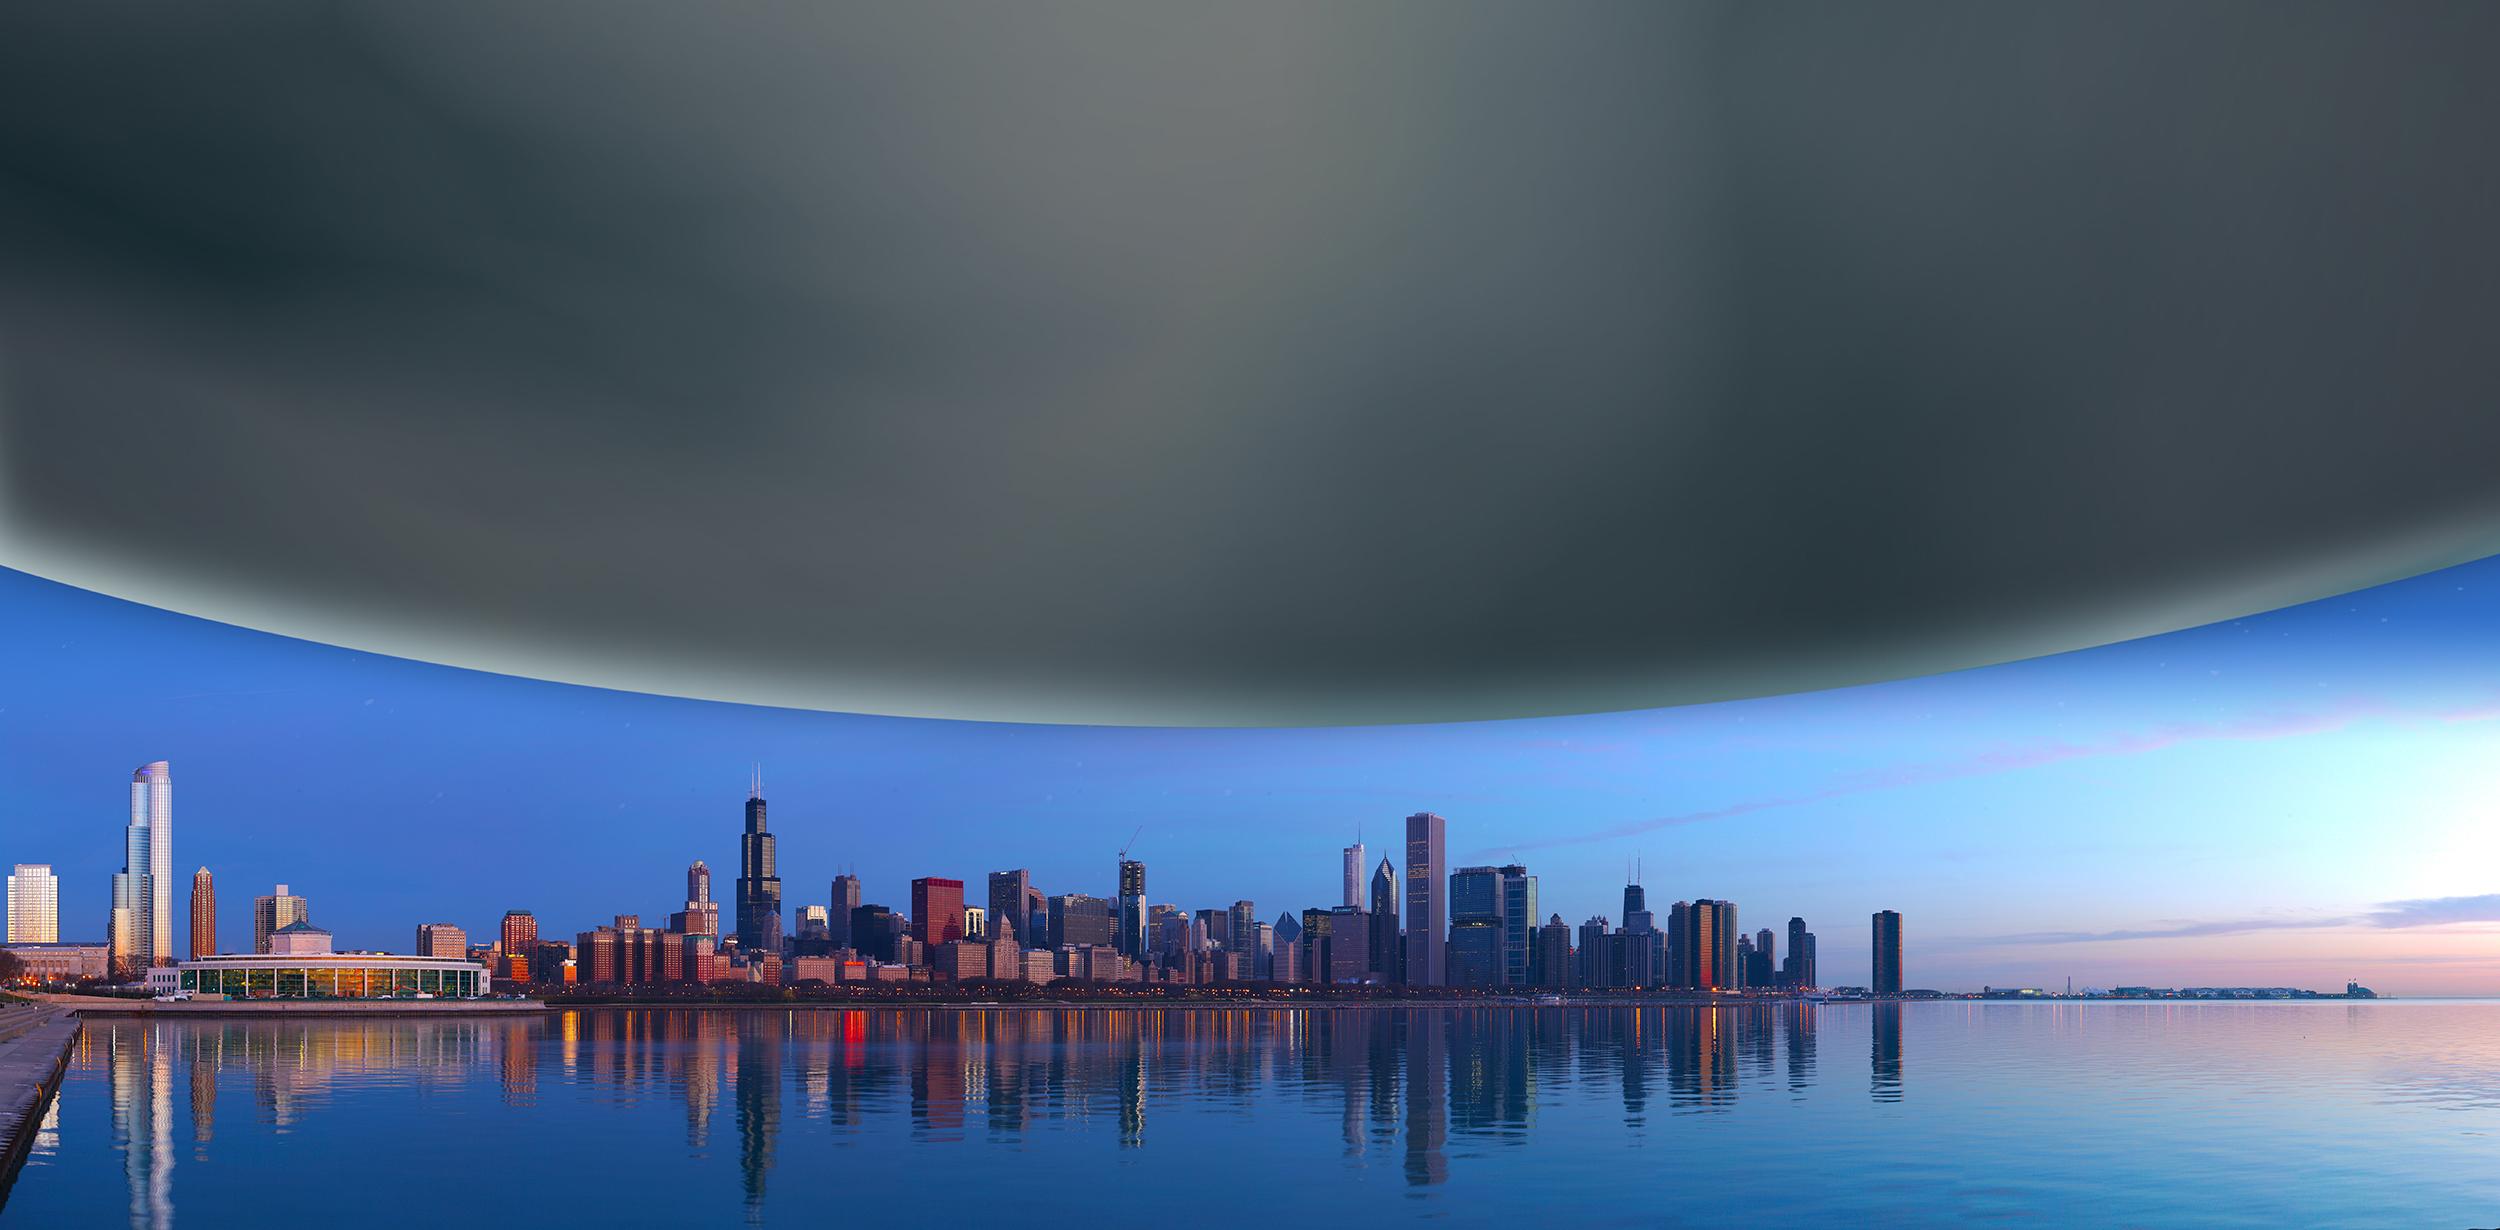 Neutron stars are incredibly incredibly dense, squeezing more than the mass of the sun into a sphere the size of a city. The diameter of a neutron star is about 12 miles, shown here scaled against the Chicago skyline for comparison. (LIGO-Virgo/Daniel Schwen/Northwestern)